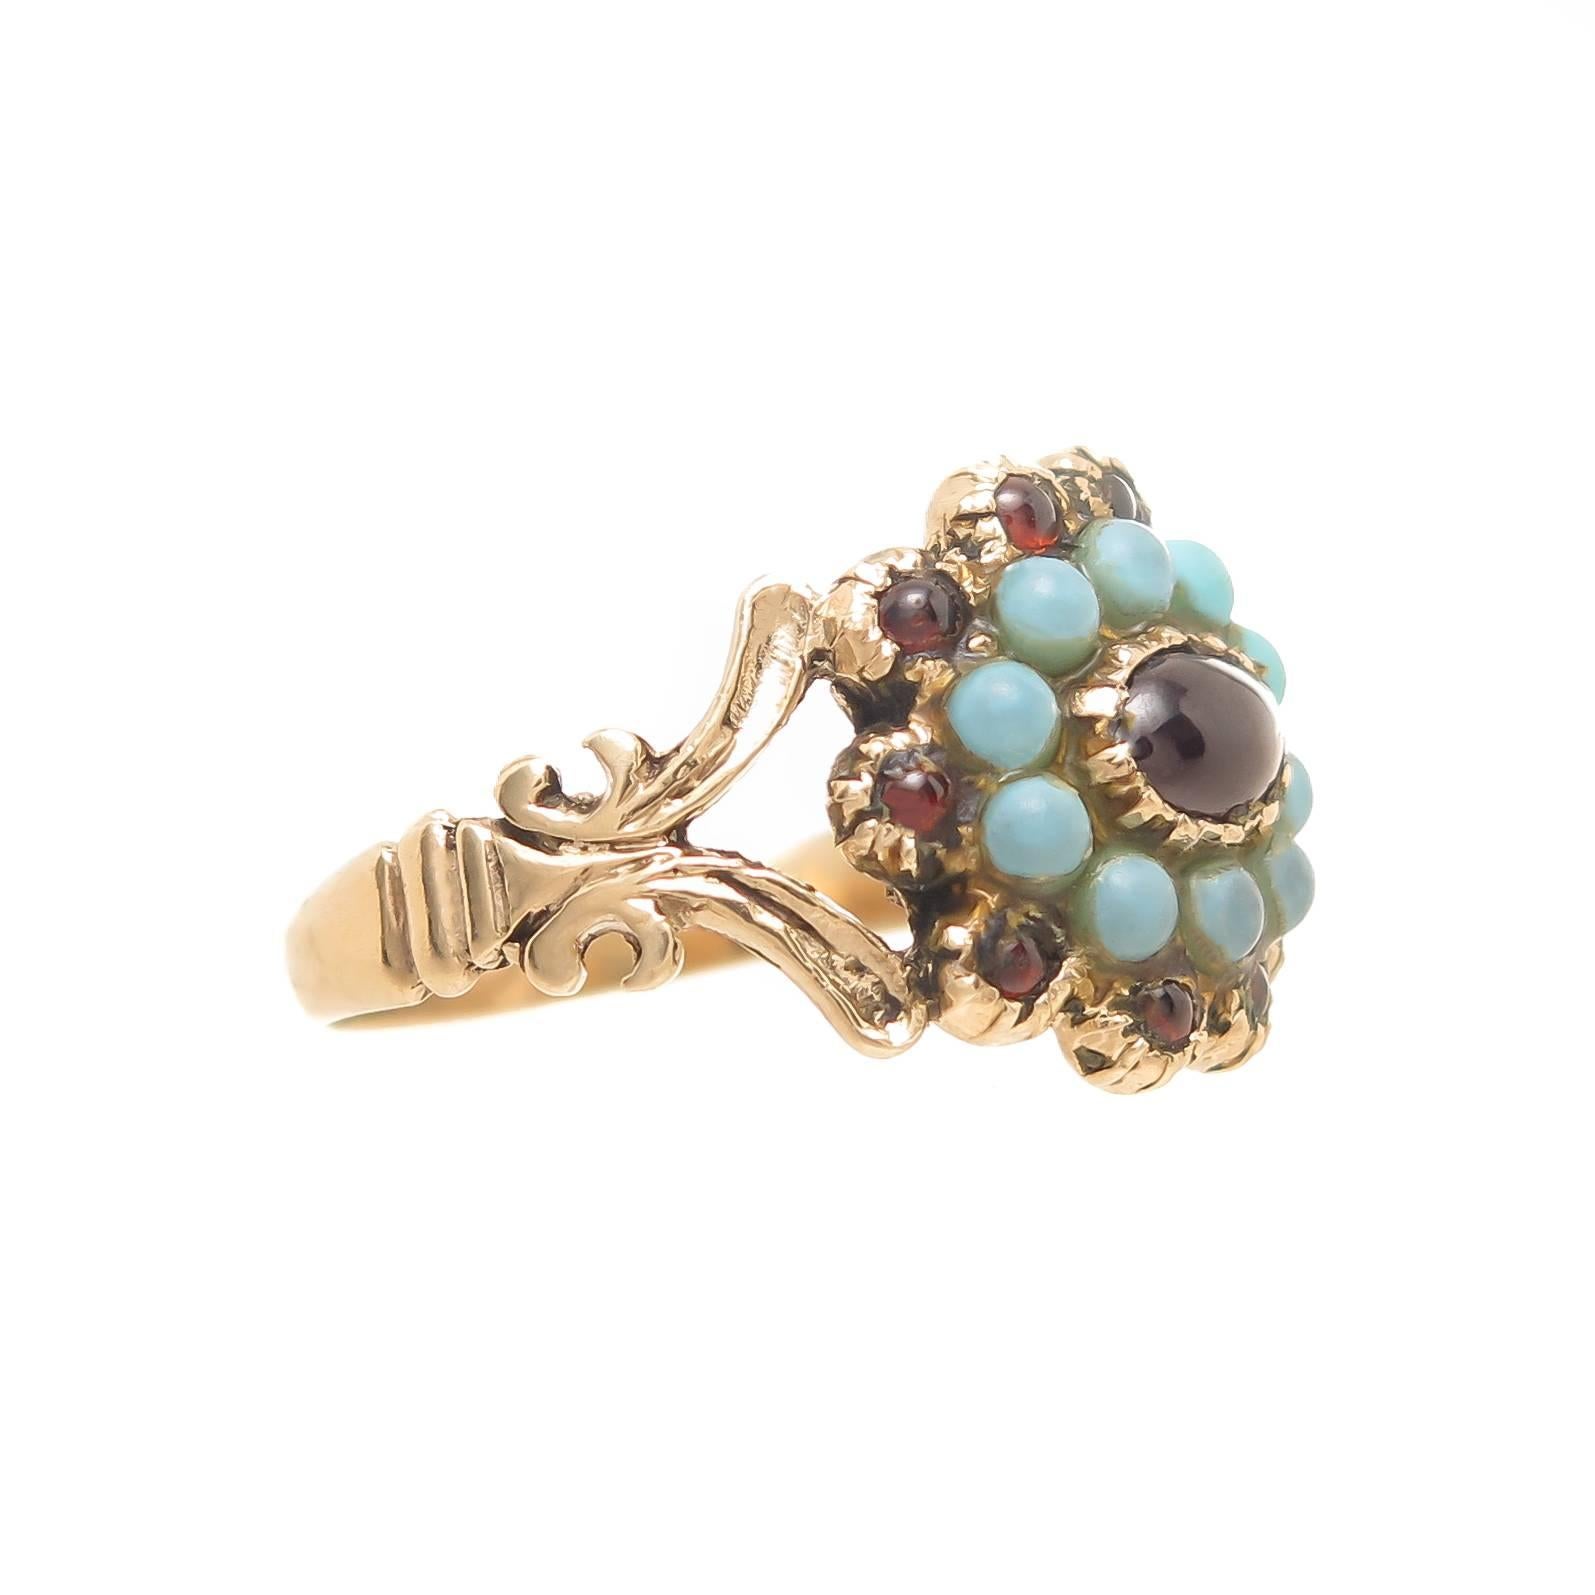 Circa 1840s 14k Yellow Gold George III period ring, set with Cabochon Garnets and Turquoise, the top of the ring measures 1/2 X 1/2 inch. Finger size = 8 1/2. Excellent condition. 